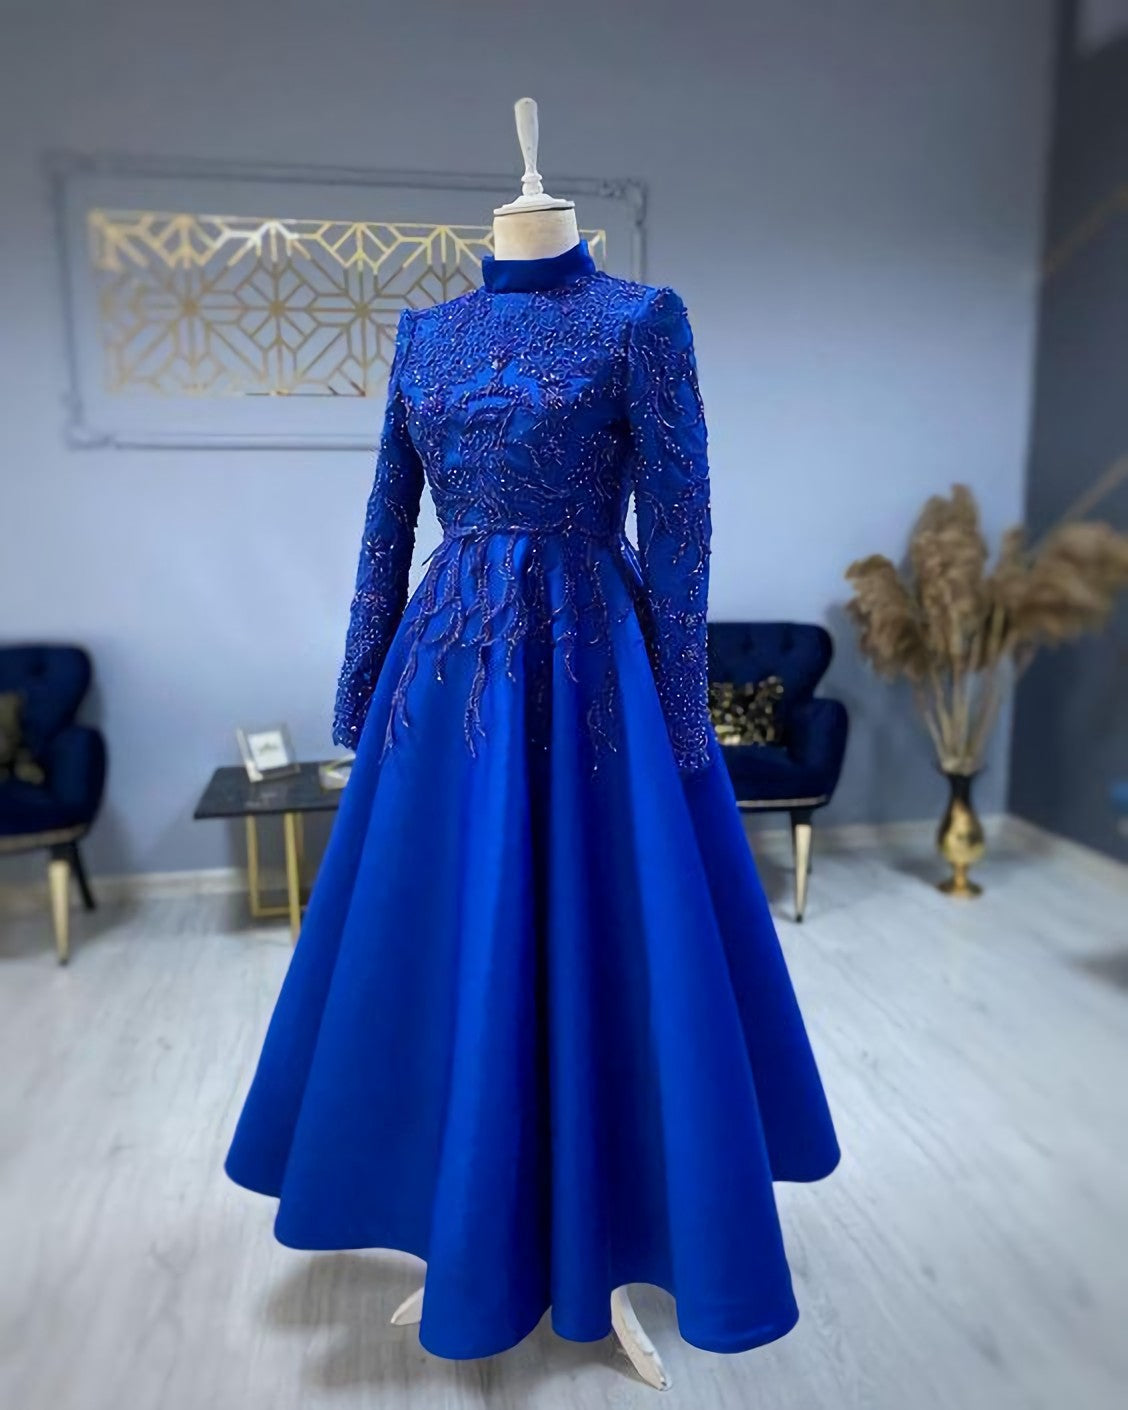 Modest Blue Prom Dresses, Lace Emroidery Evening Dress